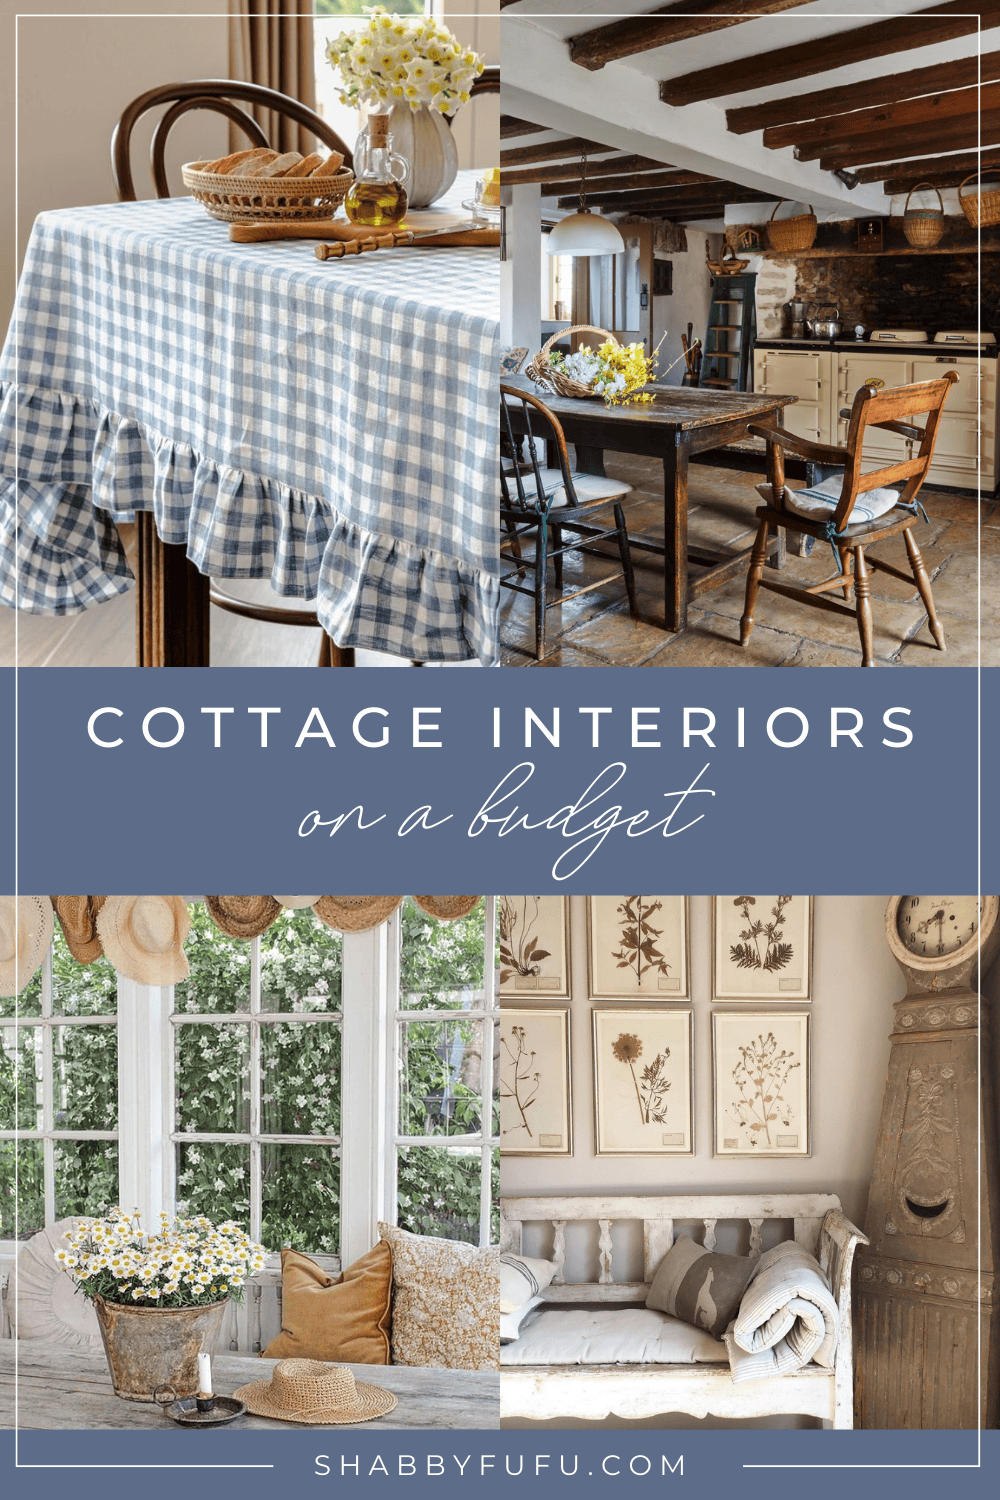 Pinterest image featuring a collage of cottage style home pictures with a title that reads "Cottage Interiors on a Budget - shabbyfufu. com"